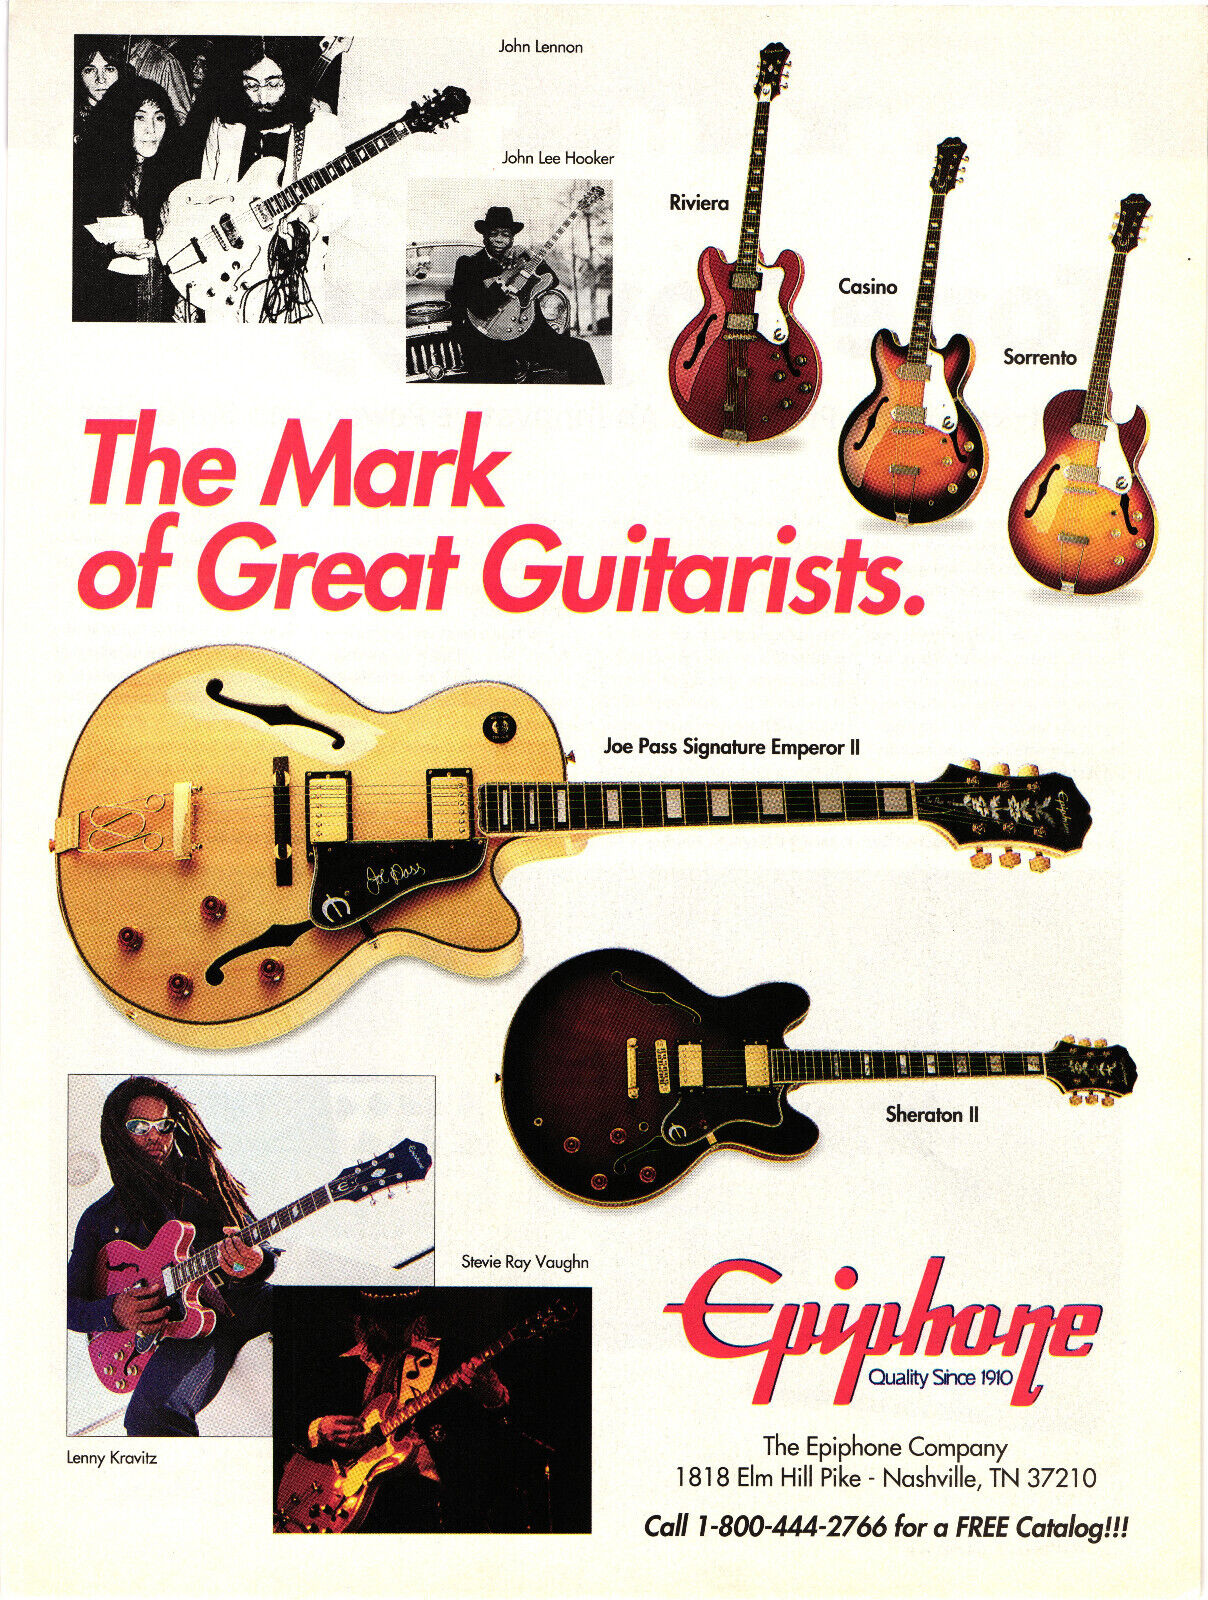 Epiphone The Mark of Great Guitarists. Print Advert